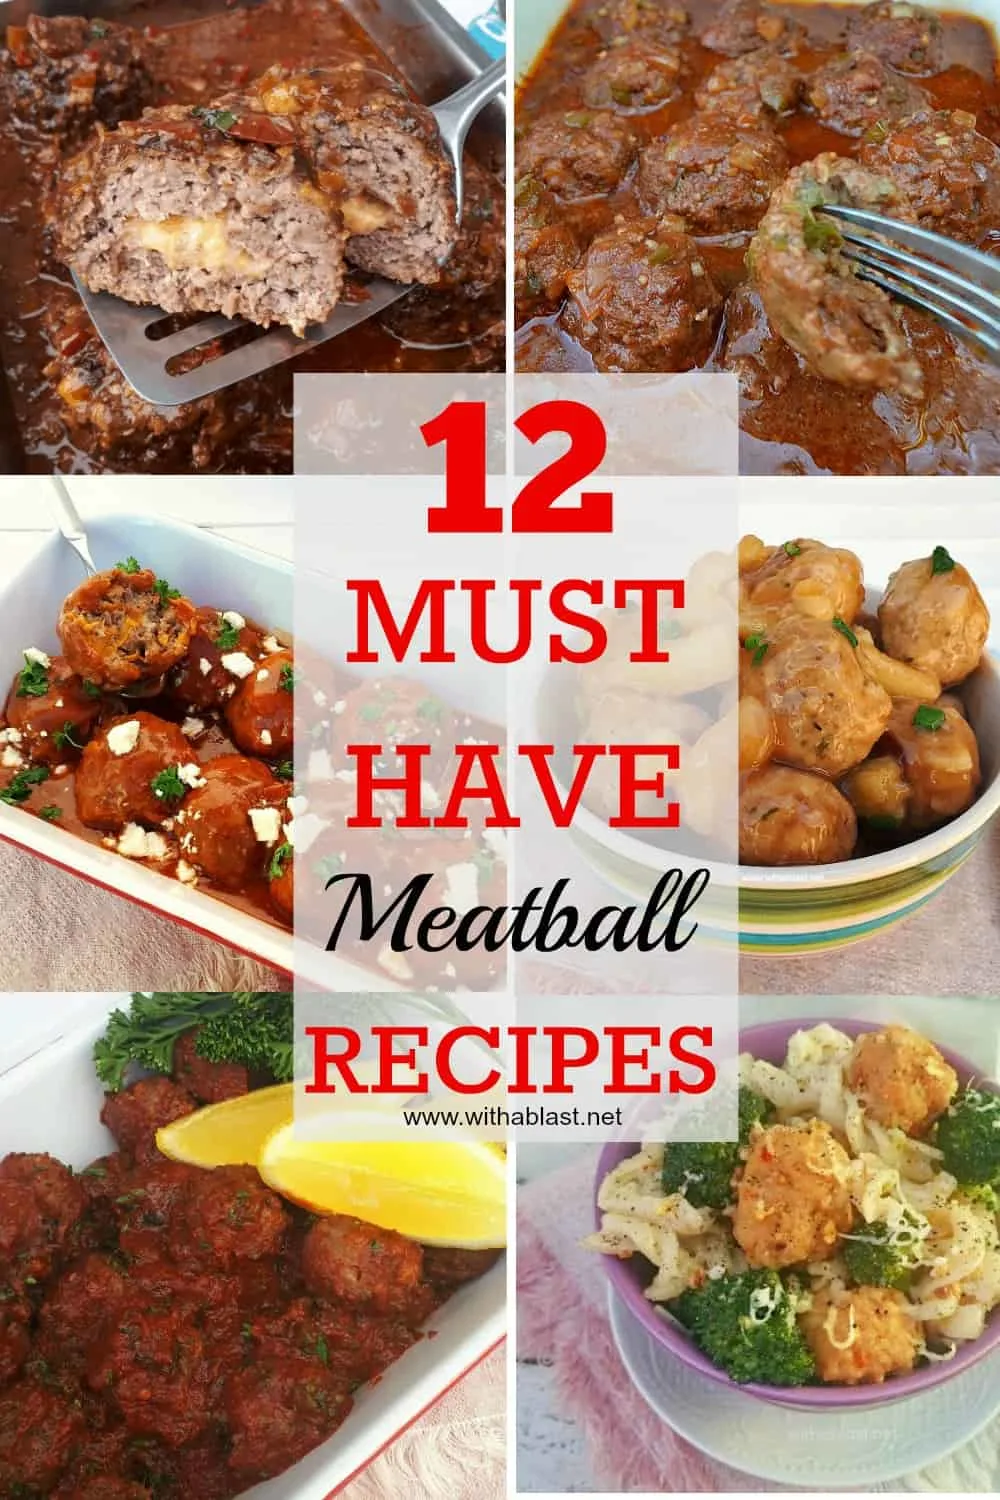 Check out these Meatball Recipes ! So perfect to serve throughout all the seasons. Most recipes can be served as not only a main meal but as an appetizer as well